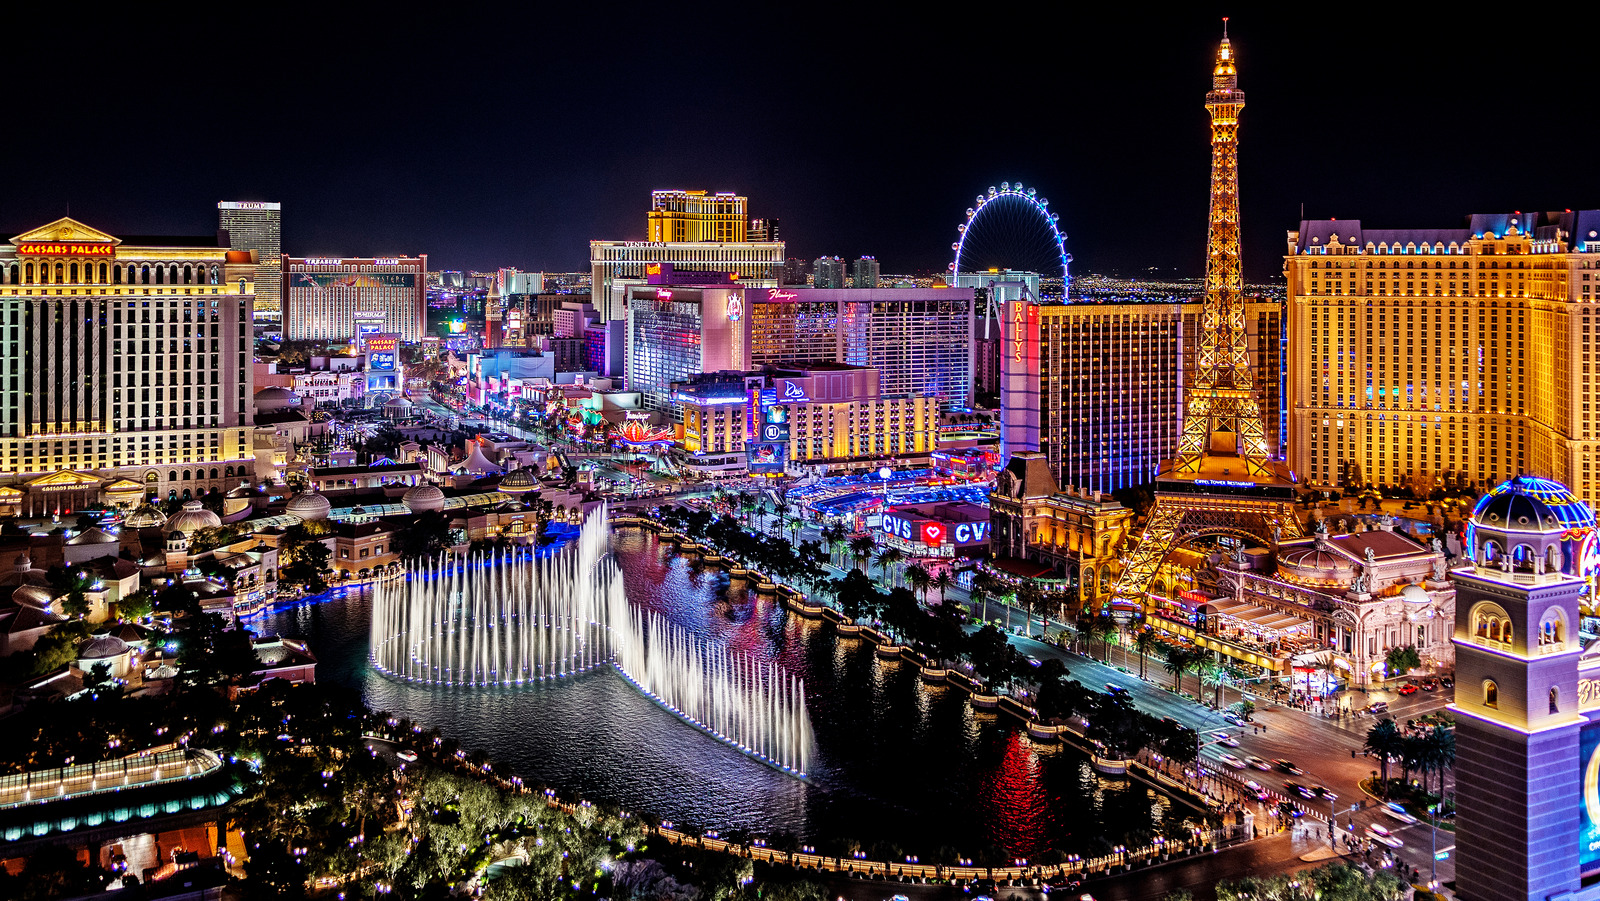 What It's Like to Visit Las Vegas Now: Shows, Food, Hotels, Sports